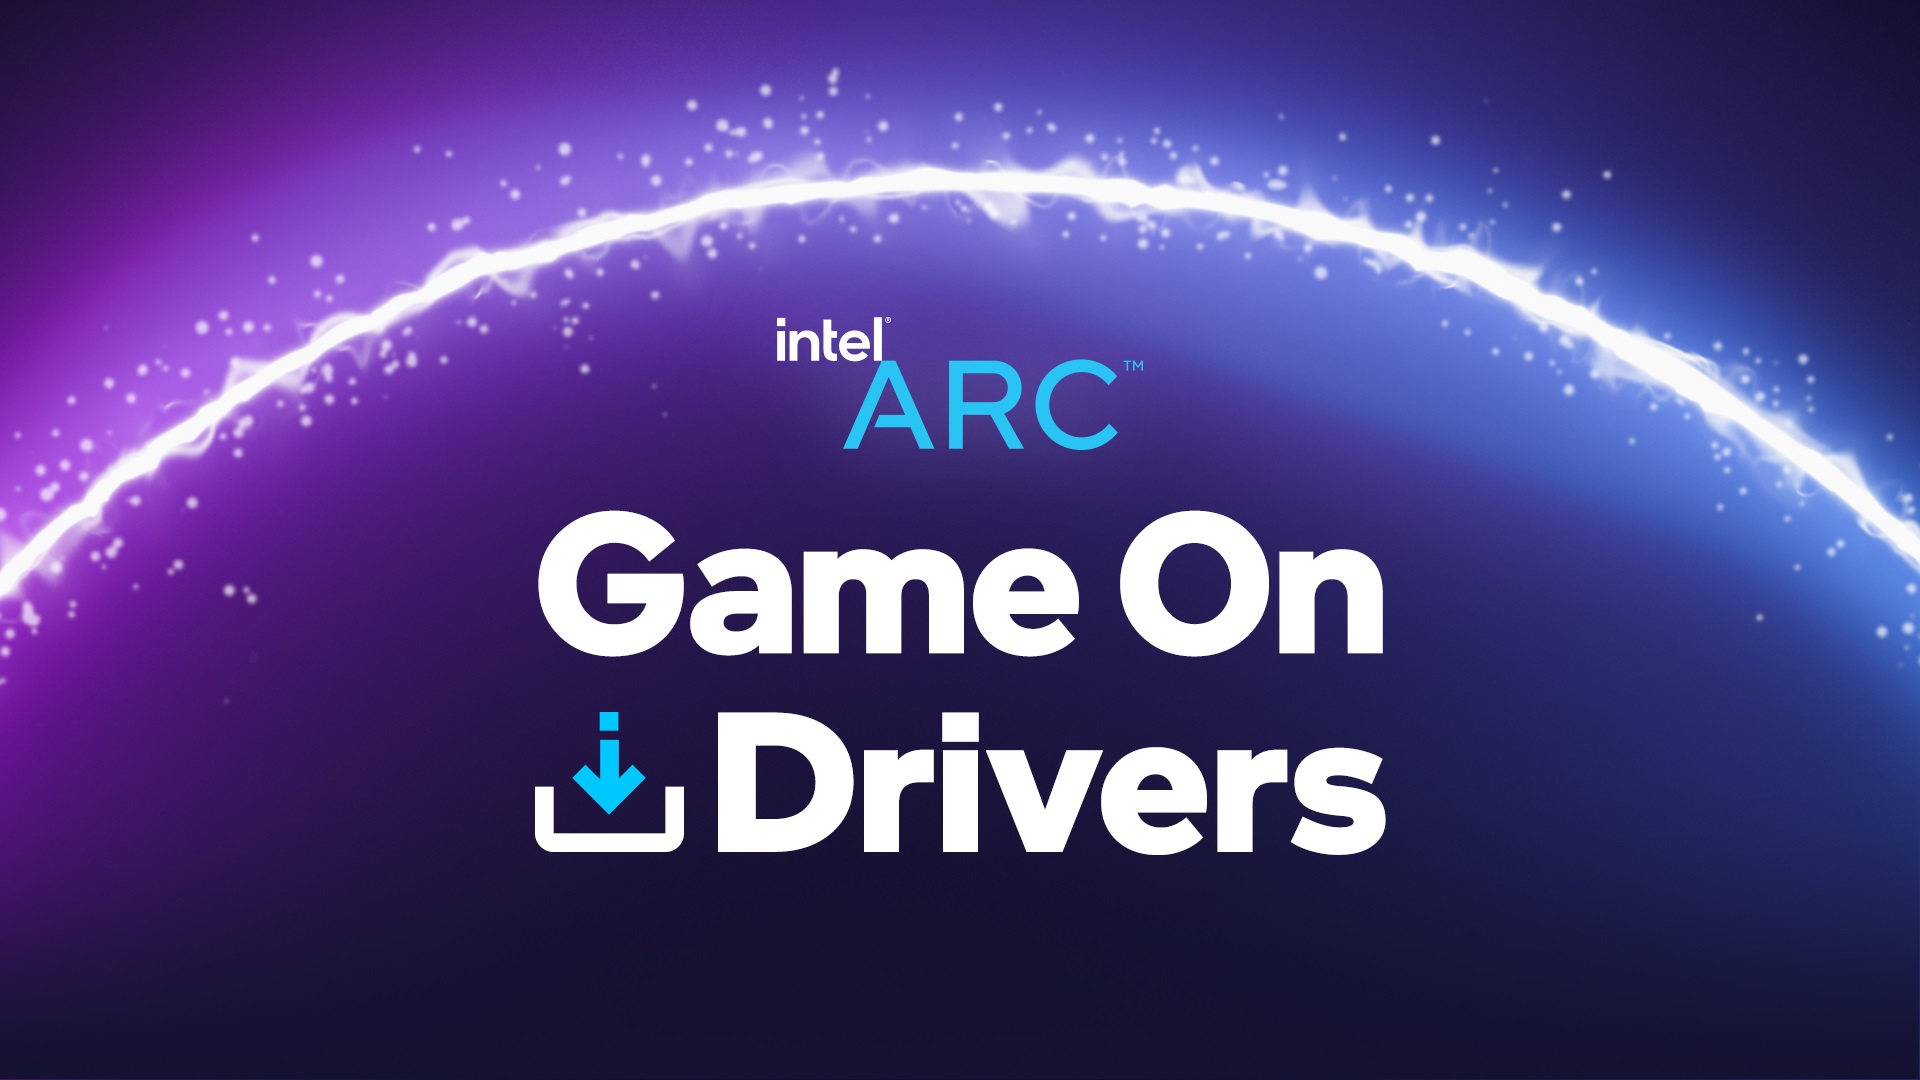 New Intel ARC “Game On” GPU drivers deliver up to 268% gains